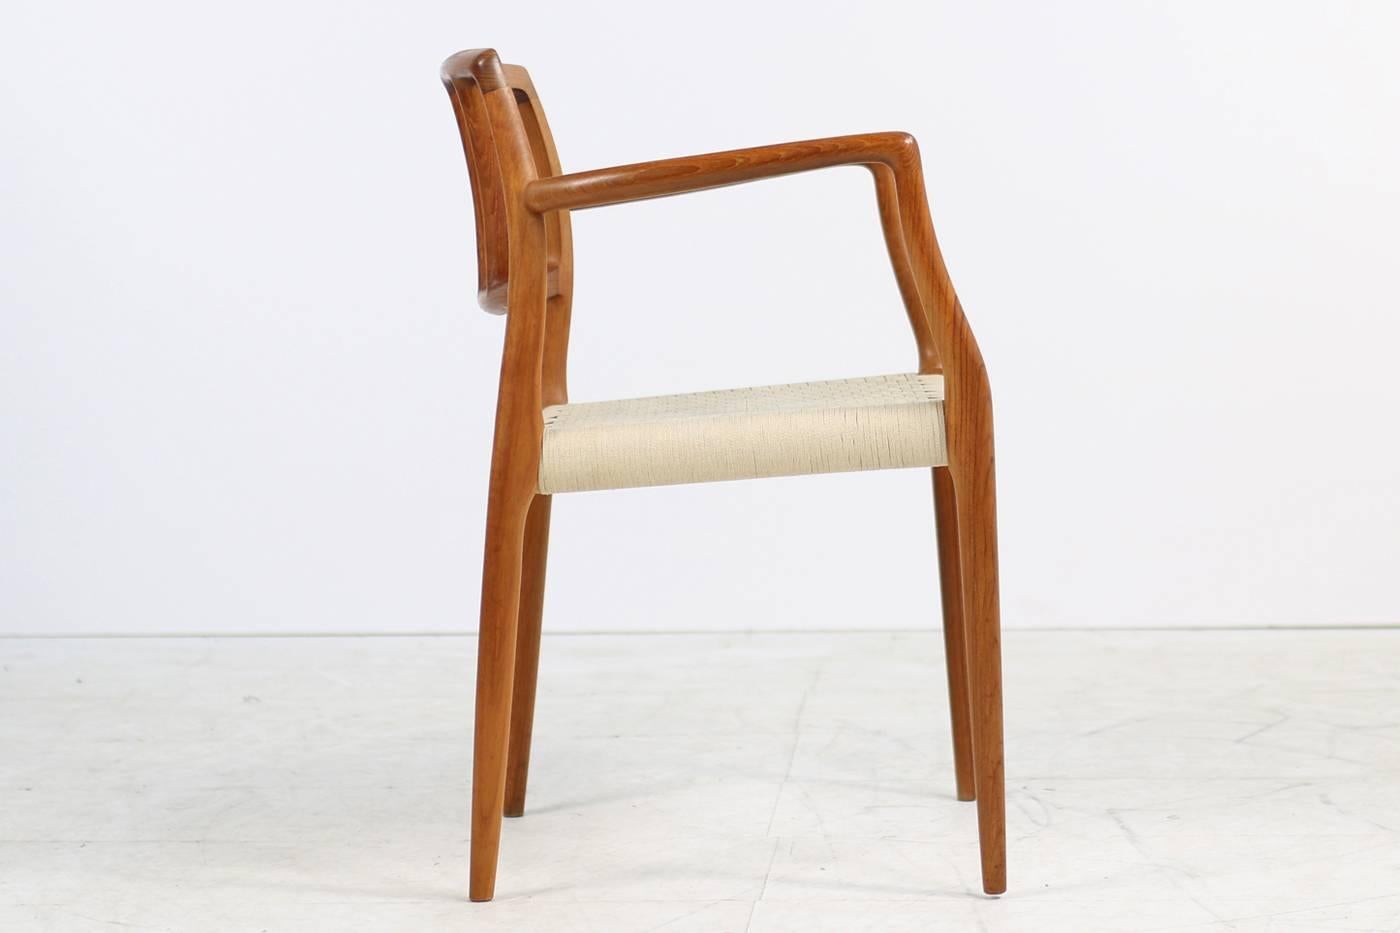 Beautiful and rare Niels O. Moller teak armchair, model 66 for J.L. Moller, Denmark. Fantatic Danish modern design, great condition. The seat is made of flat woven cord of wool string. (The matching stool is also available, please visit our 1stdibs